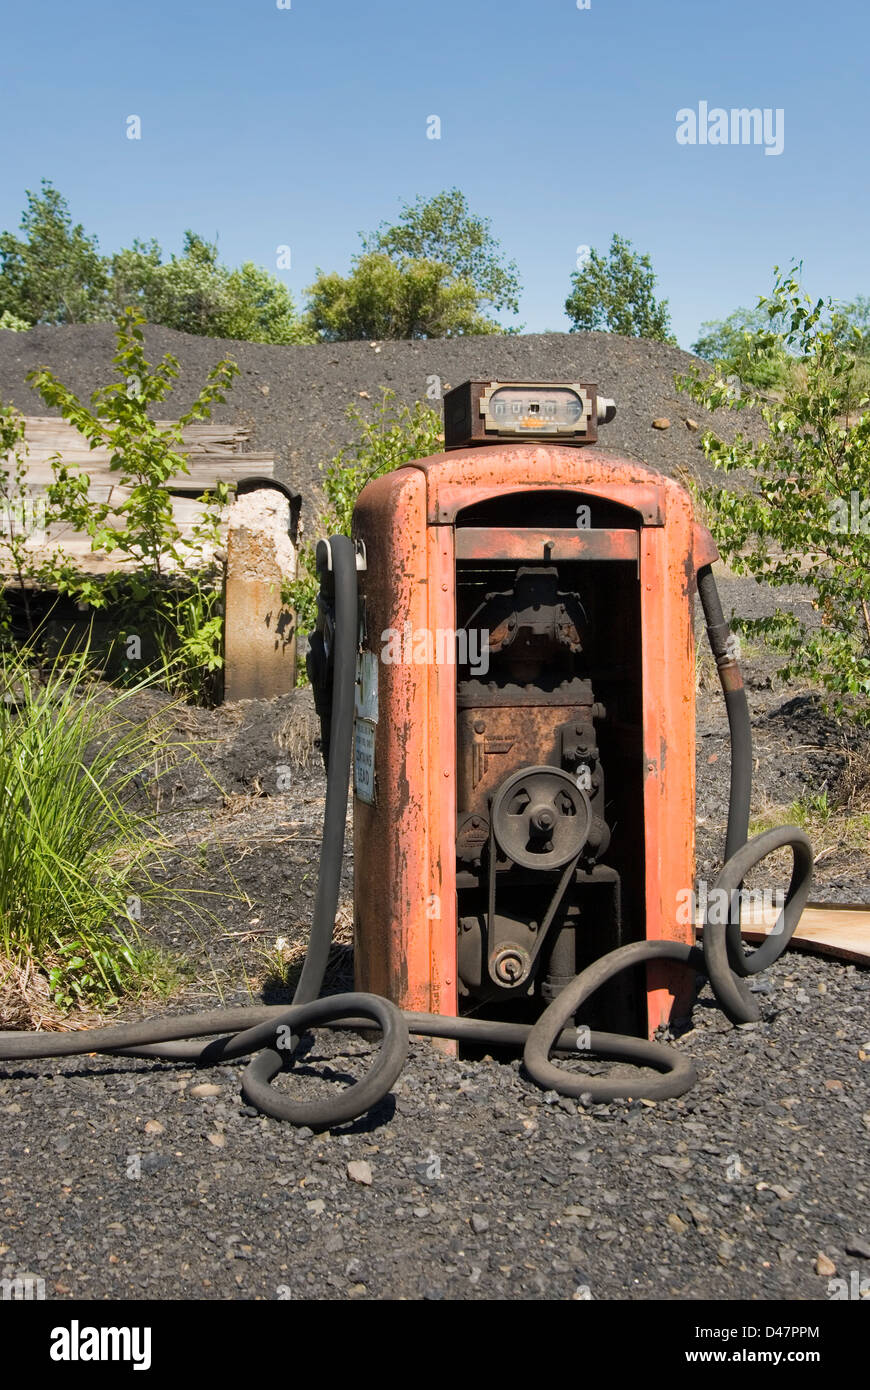 Abandoned gas pump at a used up anthracite coal mine in Pennsylvania; global warming and fossil fuel issues. Stock Photo